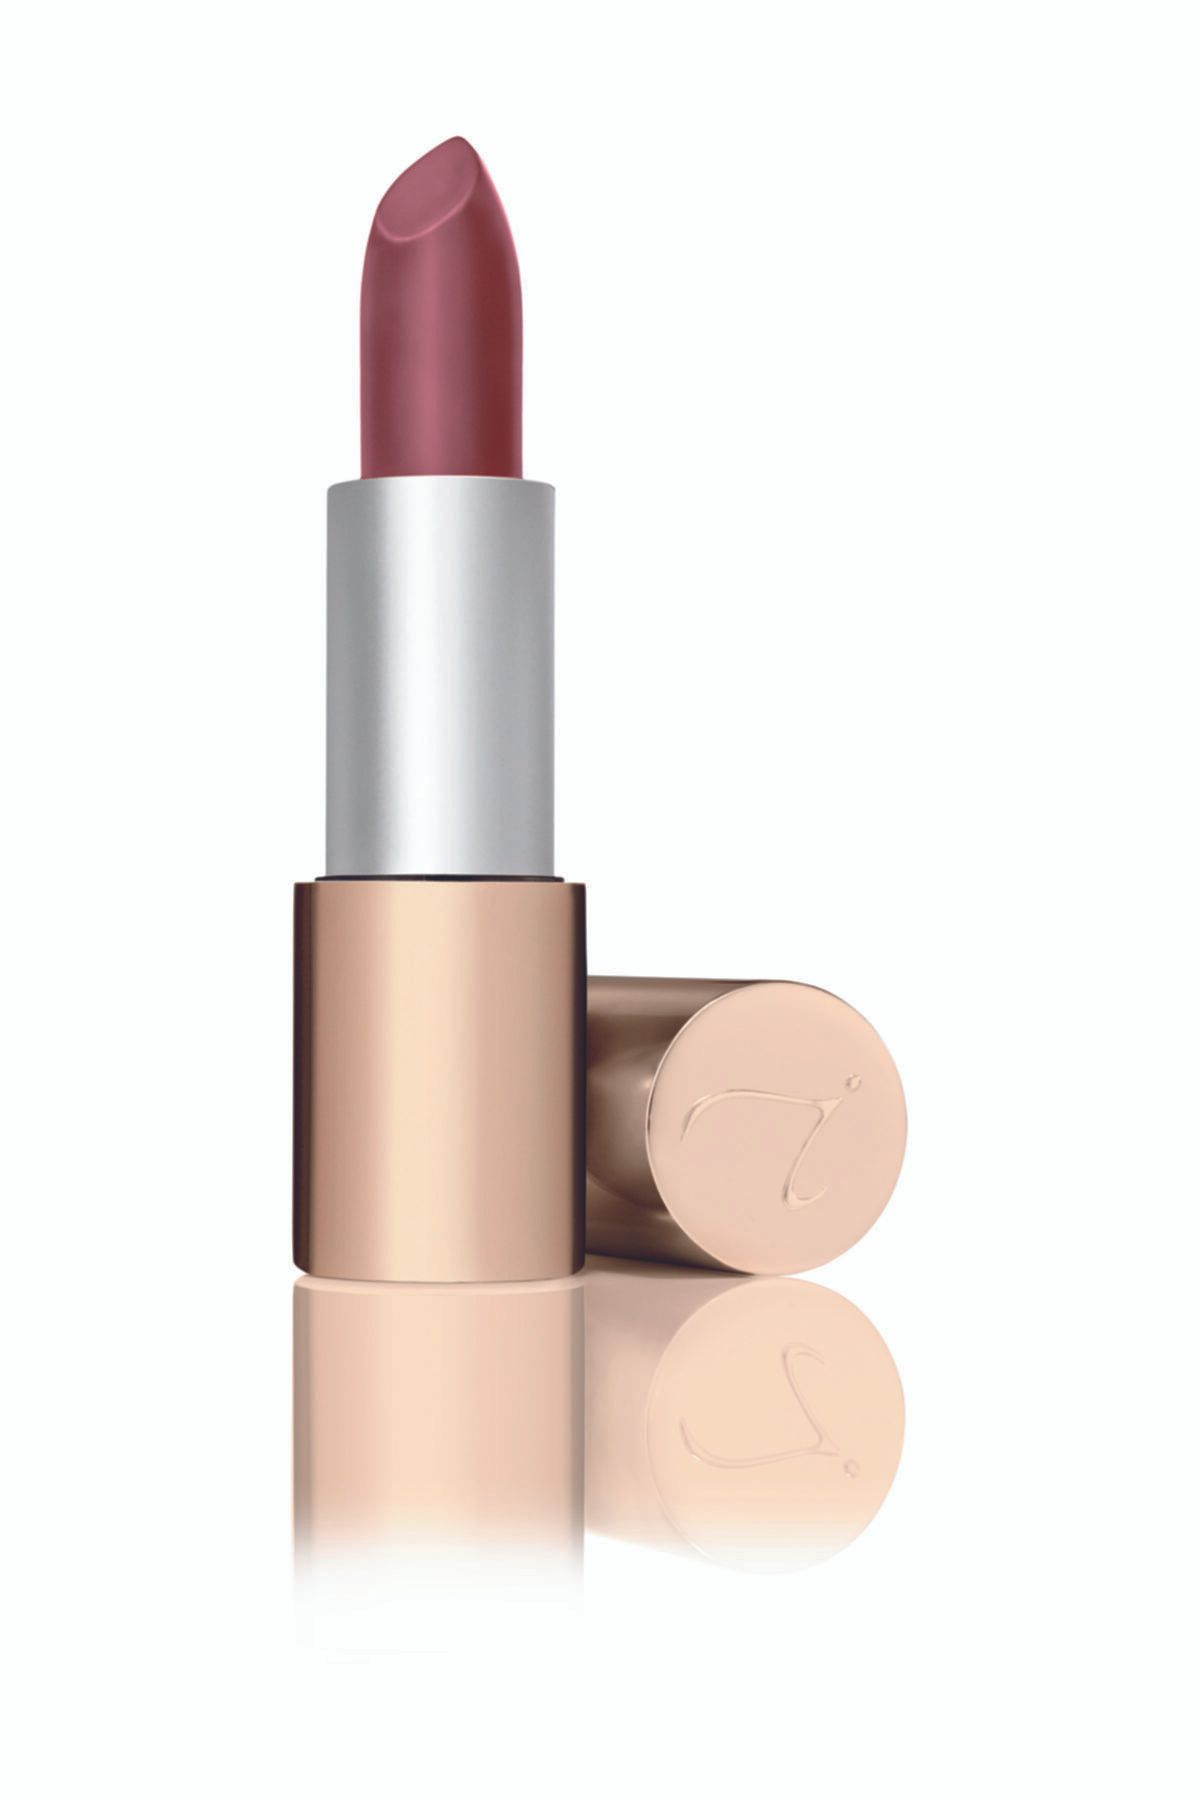 Jane Iredale Triple Luxe Long Lasting Naturaly Moist Lipstick # Jackie